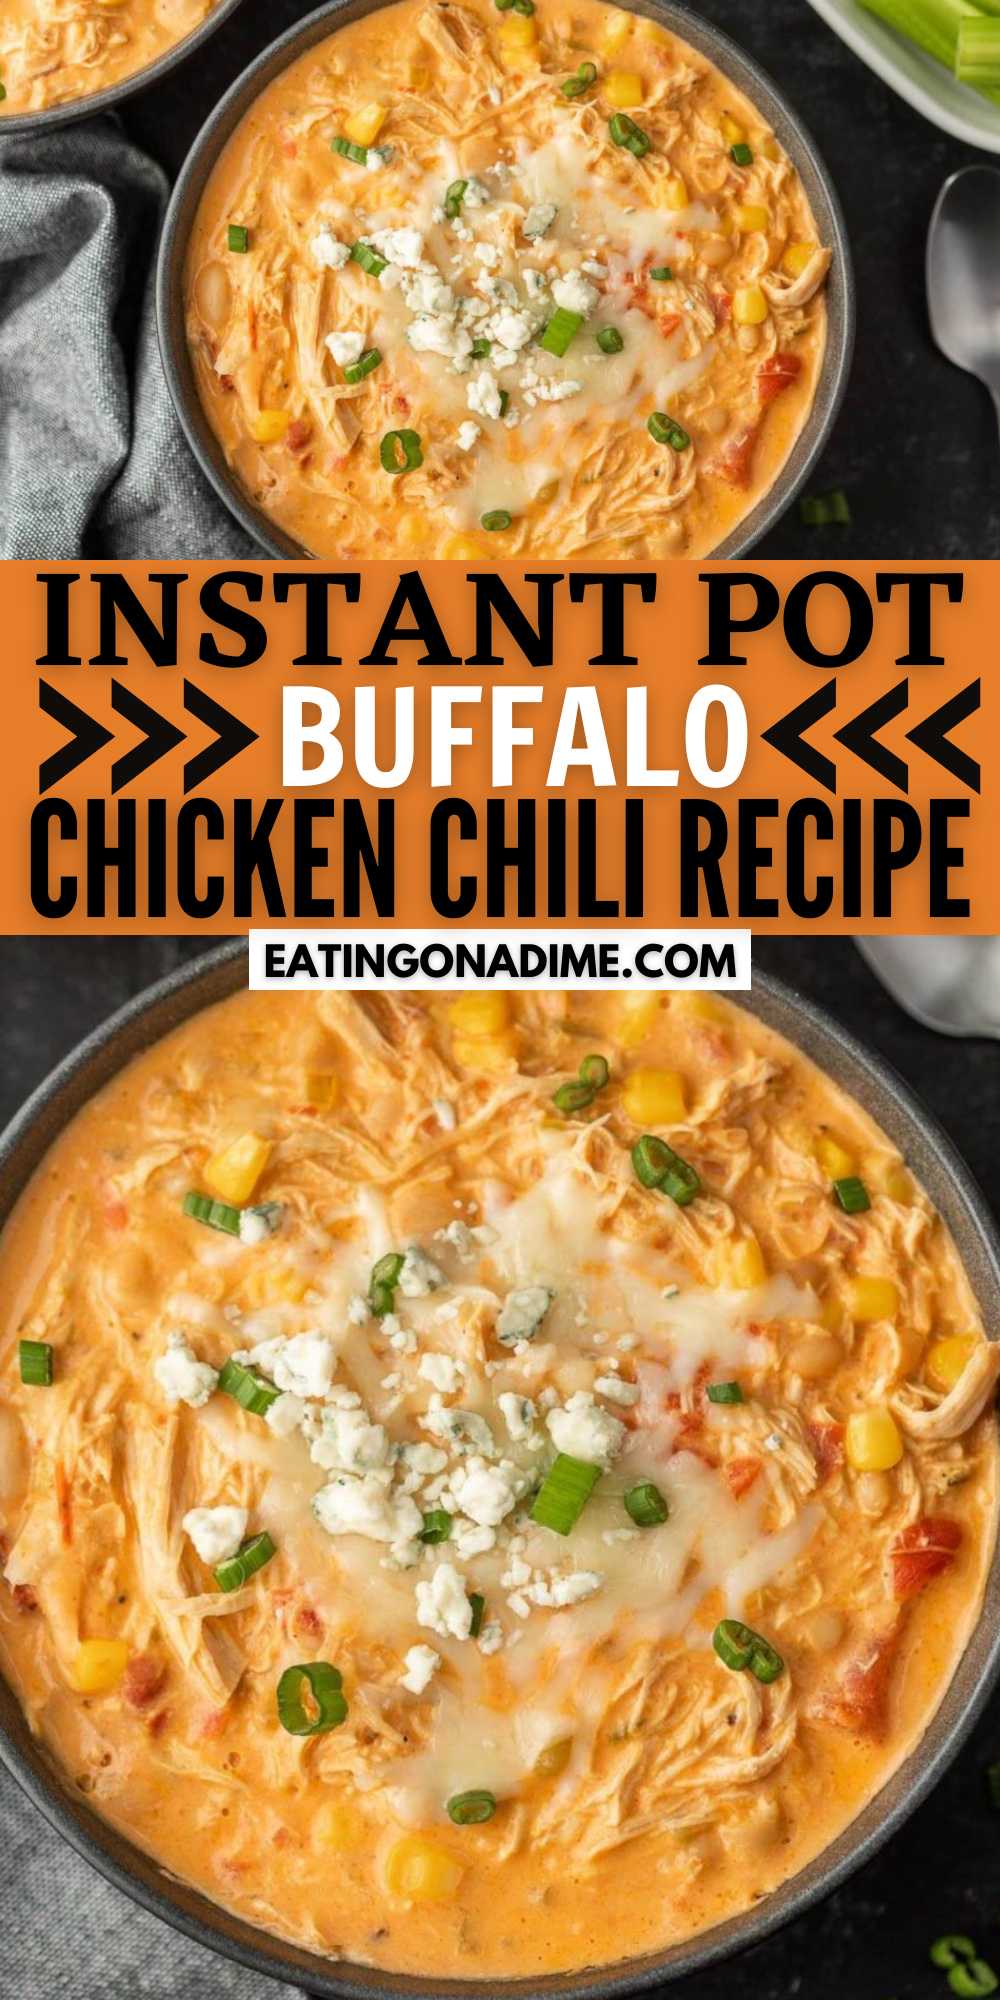 If you are looking for a twist to your classic chili recipe, then make this Instant Pot Chicken Chili. Creamy, delicious and easy to make. Making this buffalo chicken chili recipe in the instant pot makes for an easy weeknight meal. All the ingredients are added to the instant pot and pressure cooked for about 30 minutes. #eatingonadime #instantpotbuffalochickenchili #buffalochickenchili #instantpotrecipes